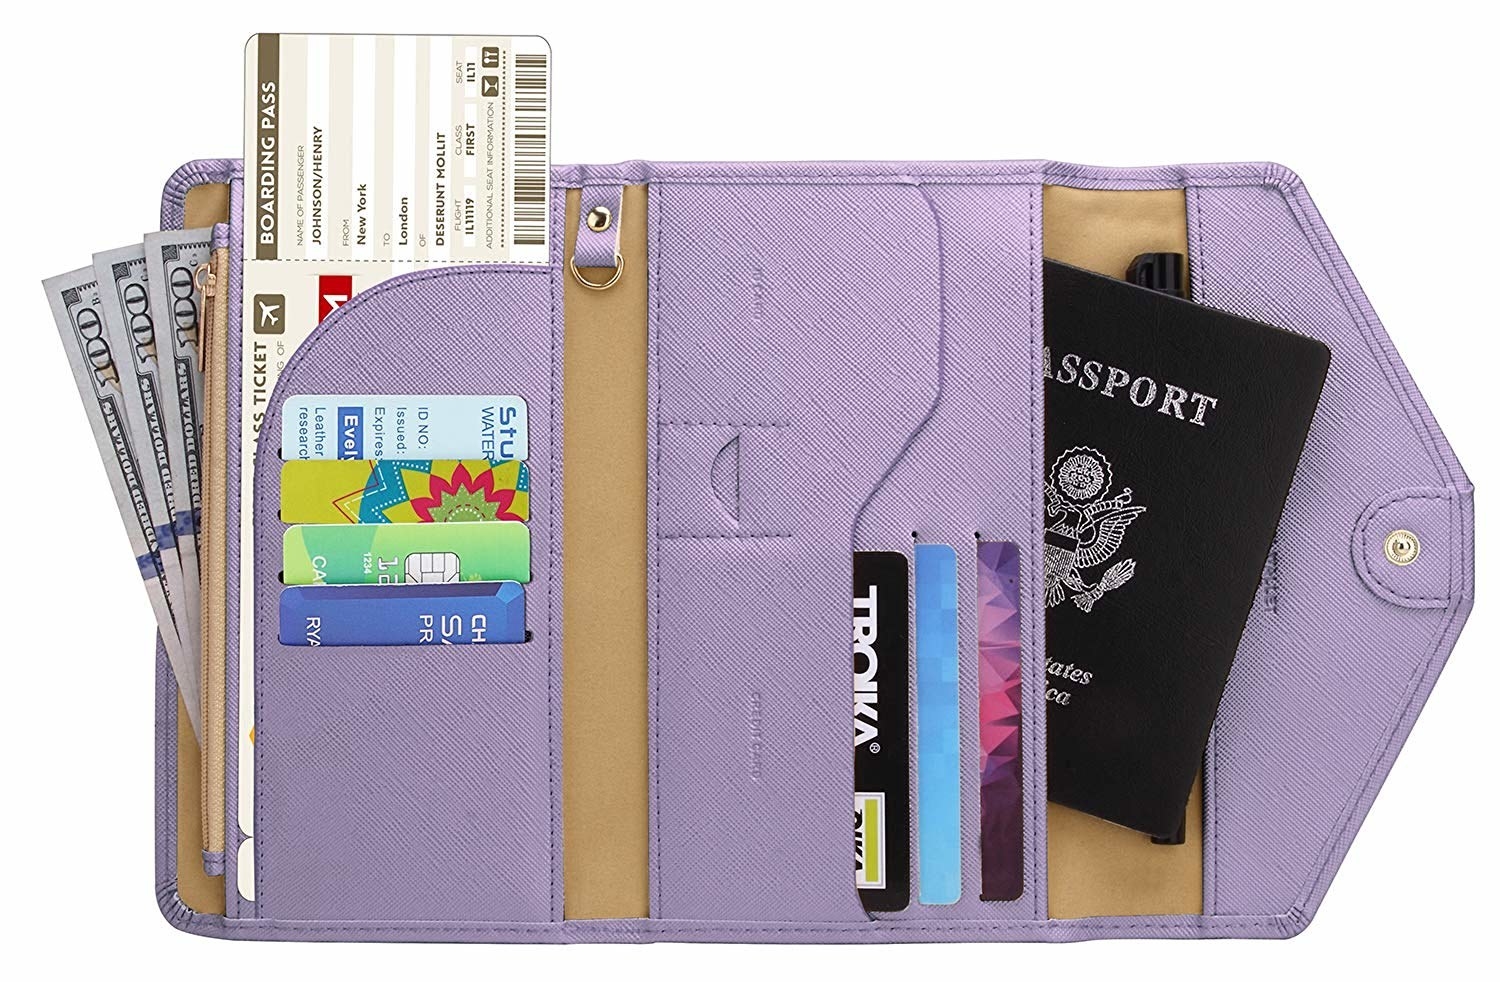 The purple wallet folding out to show compartments for a passport, ID, seven credit cards, a boarding pass, and cash